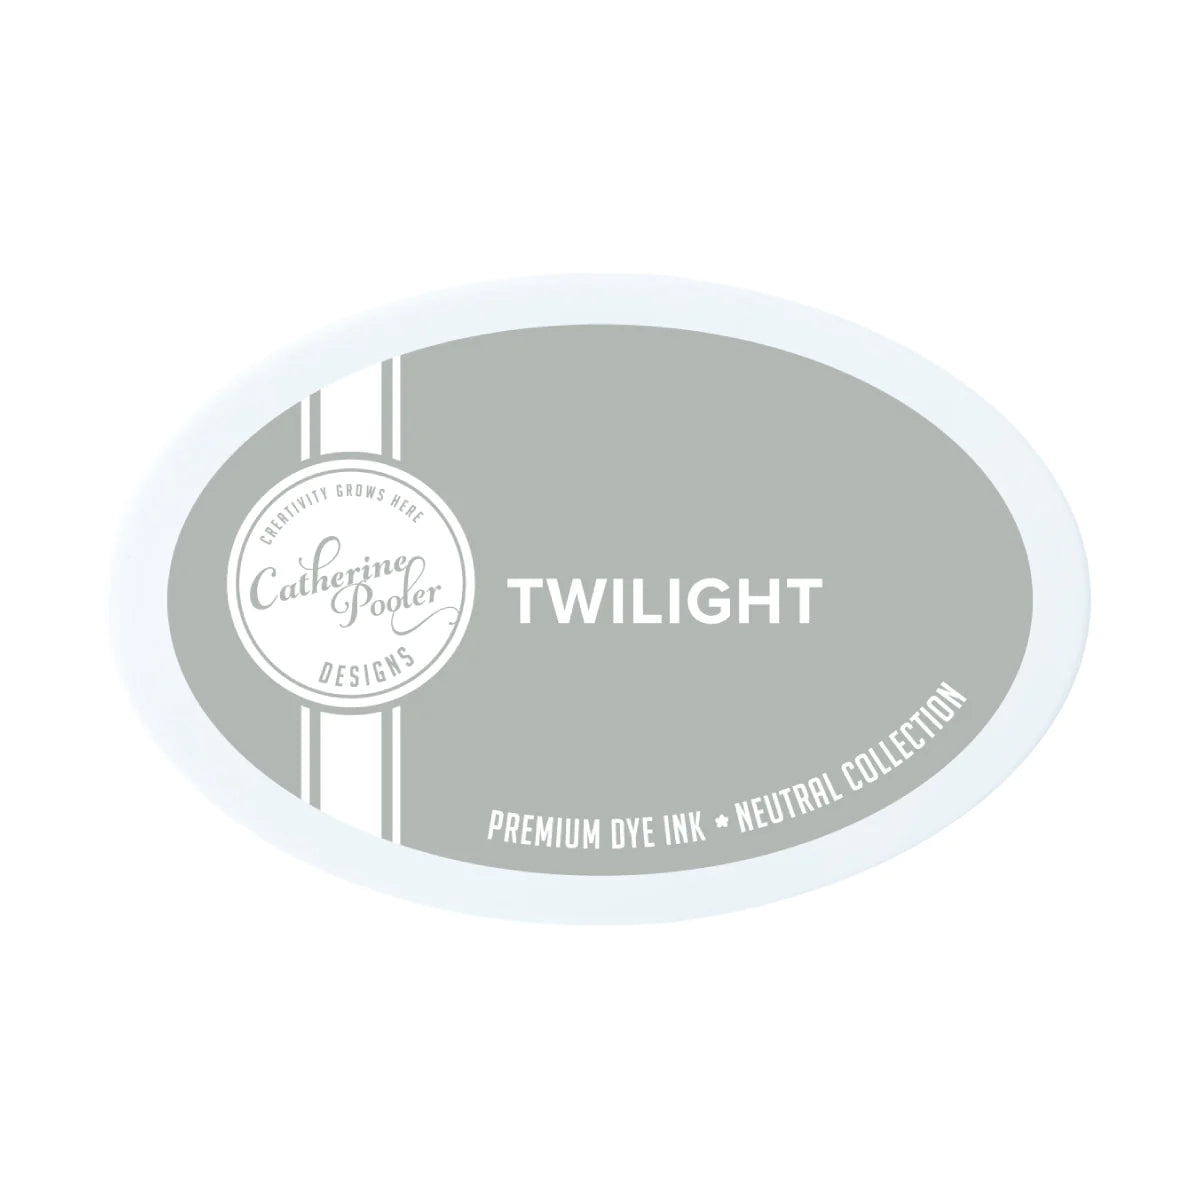 Twilight Premium Dye Ink Pad - Neutral Collection